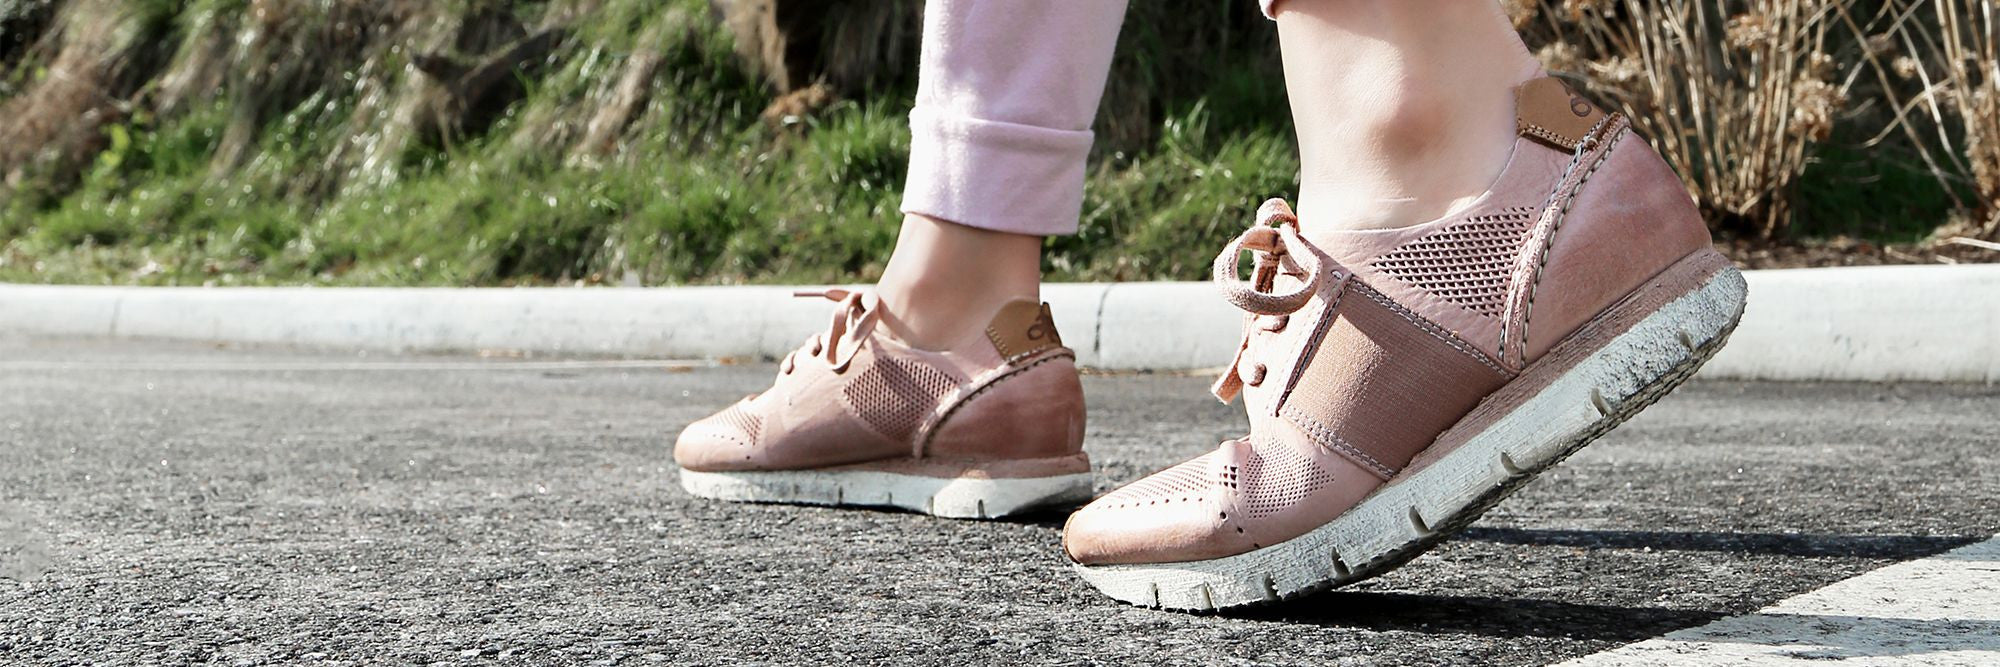 Trend Blush Pink Sneakers - OTBT shoes